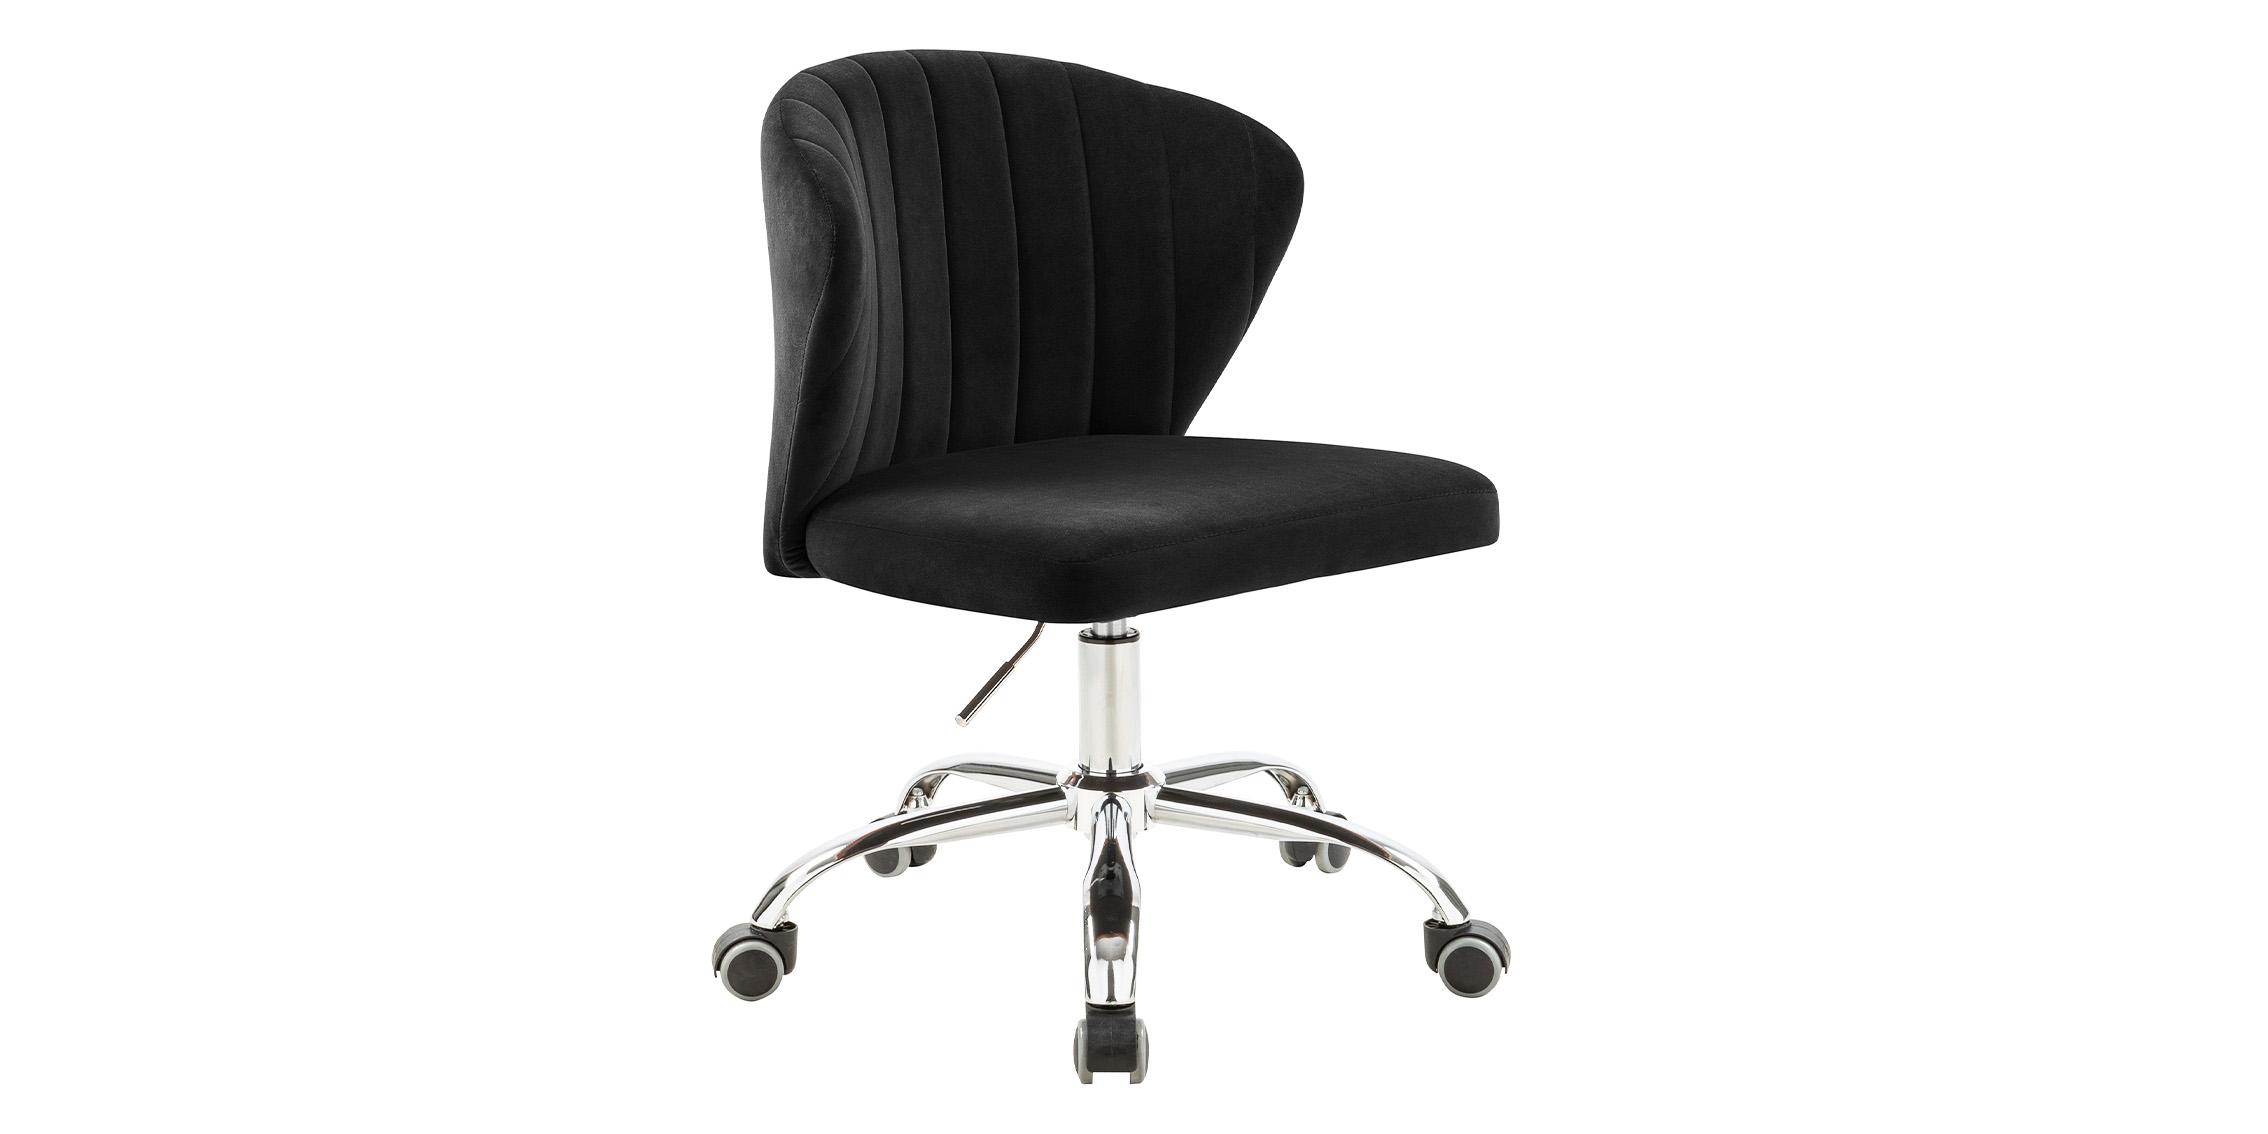 Contemporary, Modern Office Chair FINLEY 166Black 166Black in Chrome, Black Fabric